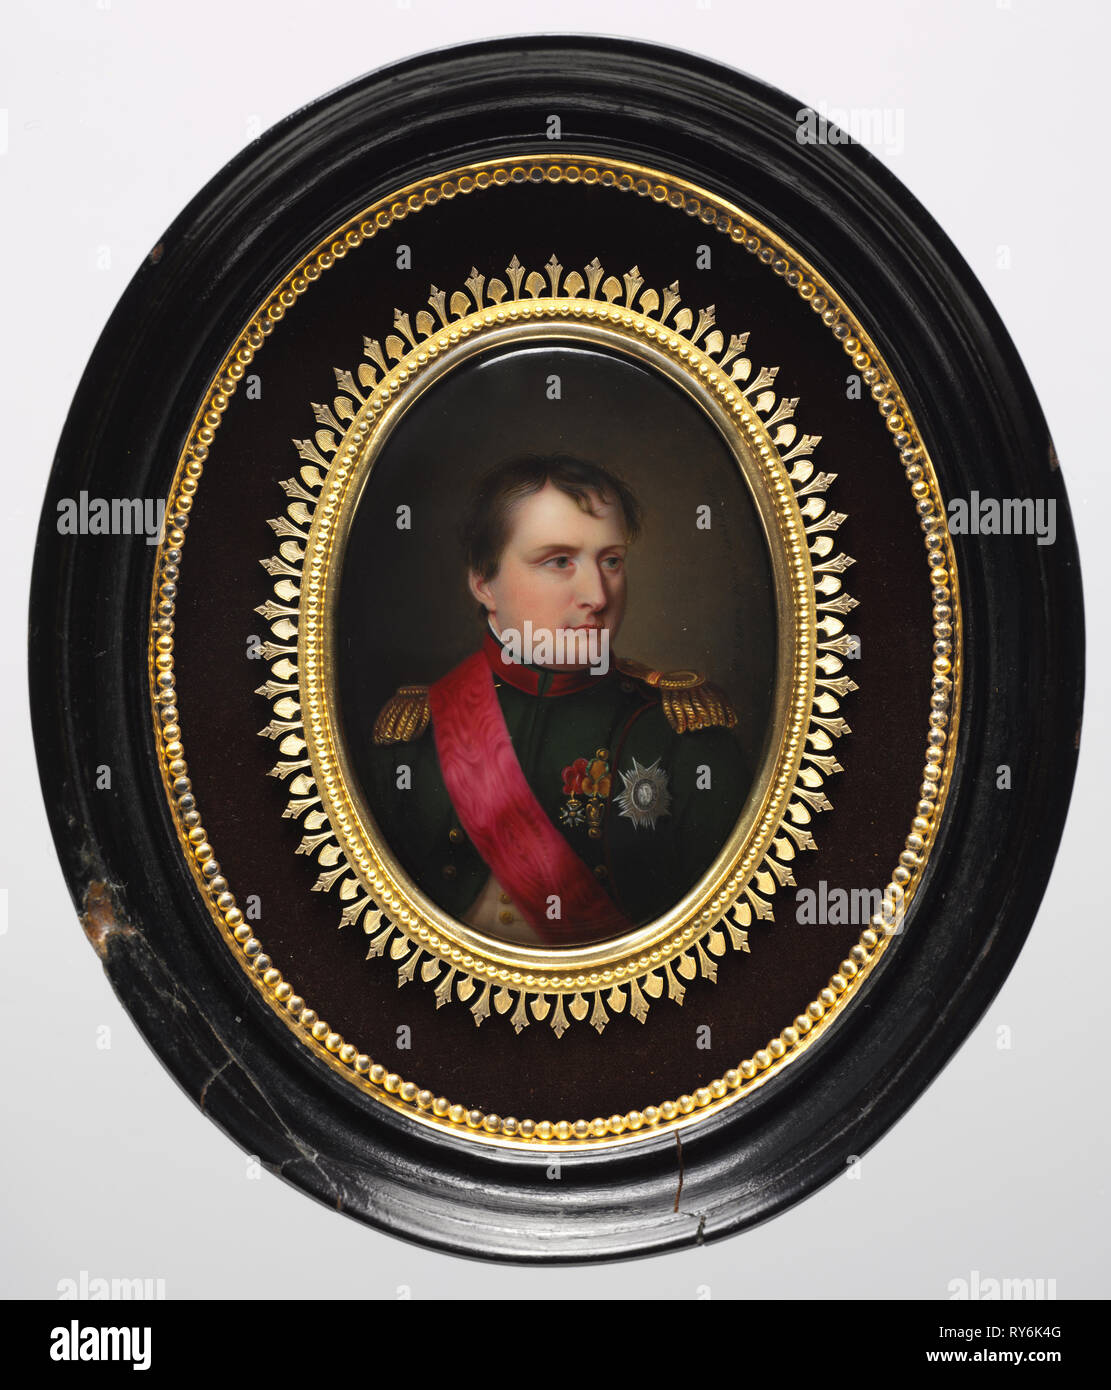 Portrait of Napoleon I, Emperor of the French, 1841. William Essex (British, 1784-1869). Enamel on copper, gilt metal and plush mount in a turned wood frame; framed: 13.5 x 11.5 cm (5 5/16 x 4 1/2 in.); unframed: 6.6 x 5 cm (2 5/8 x 1 15/16 in Stock Photo